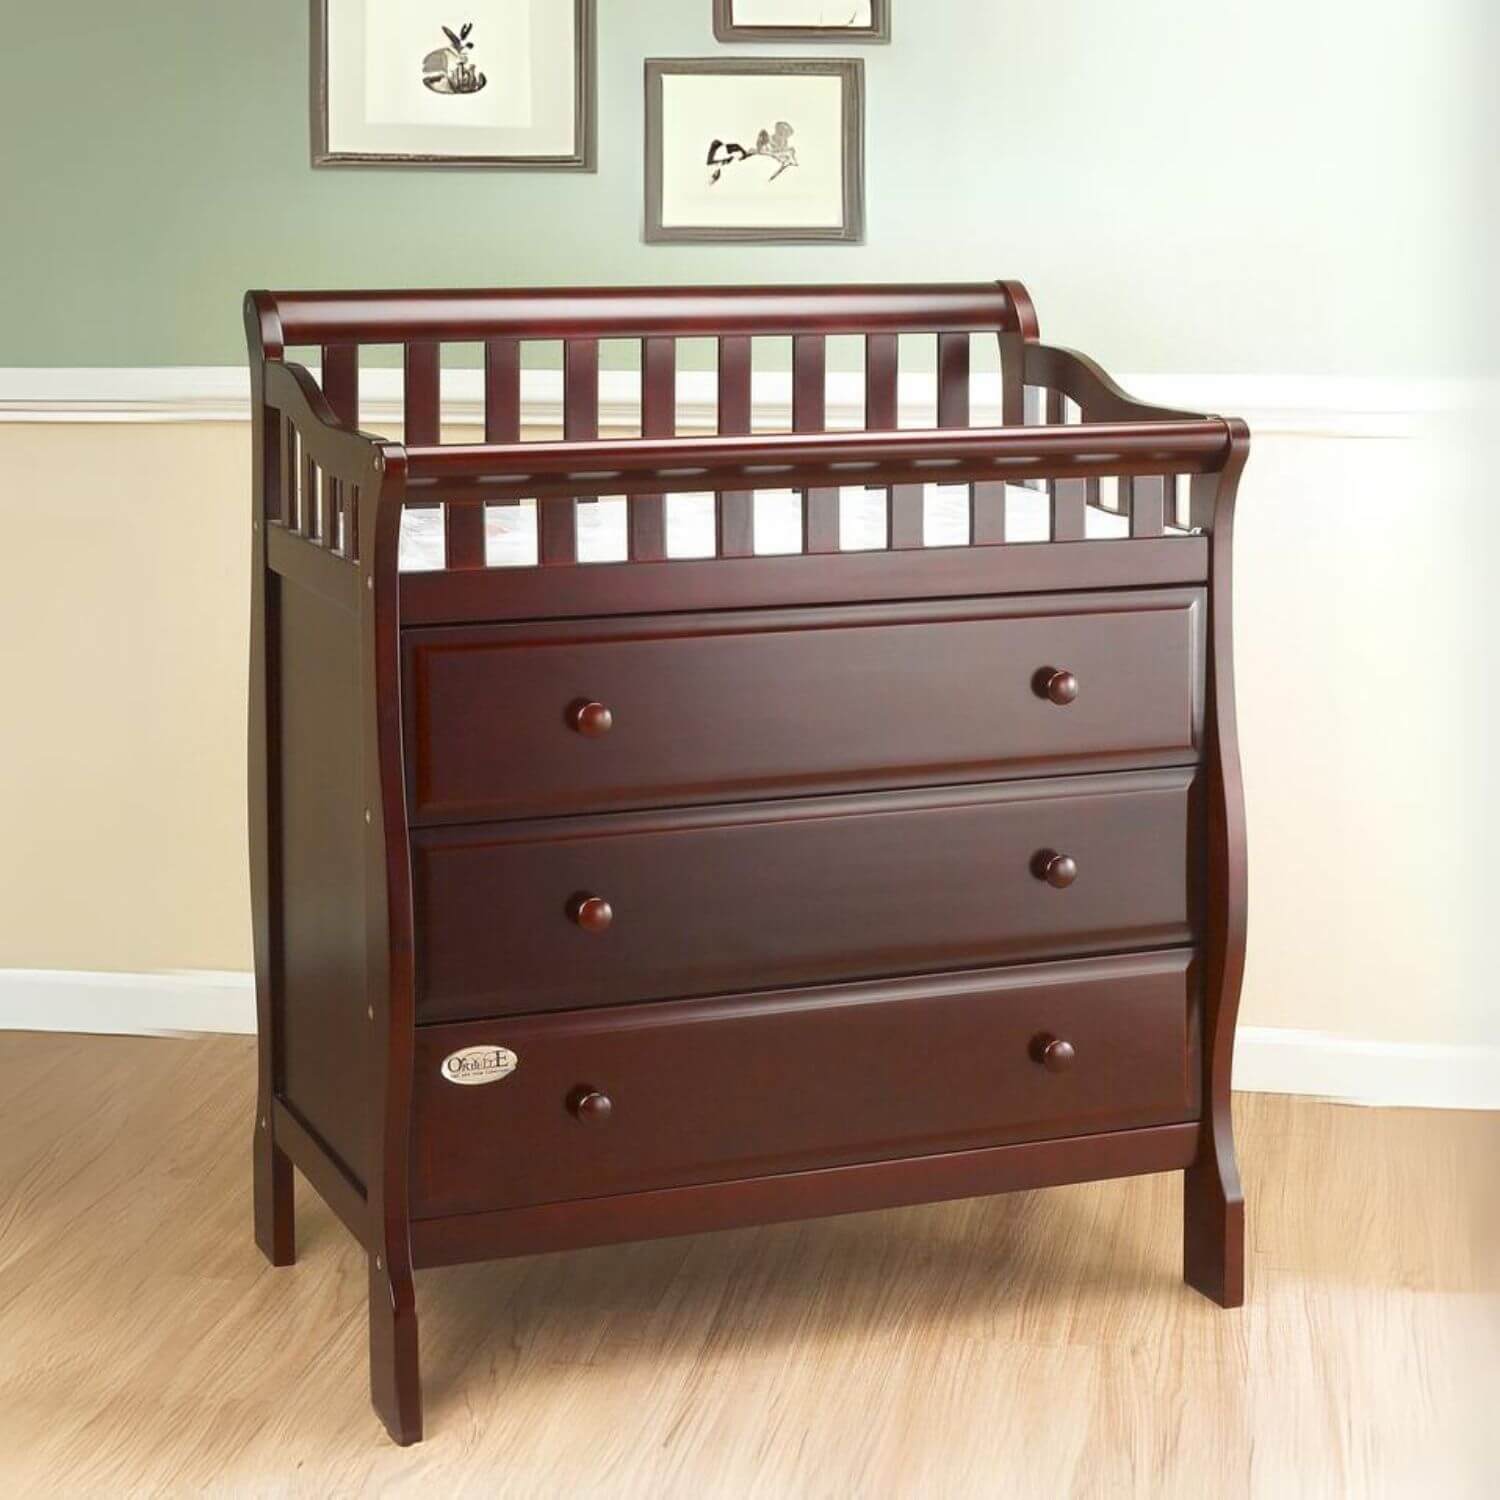 Orbelle Oneman Changing Table Cherry - Lifestyle